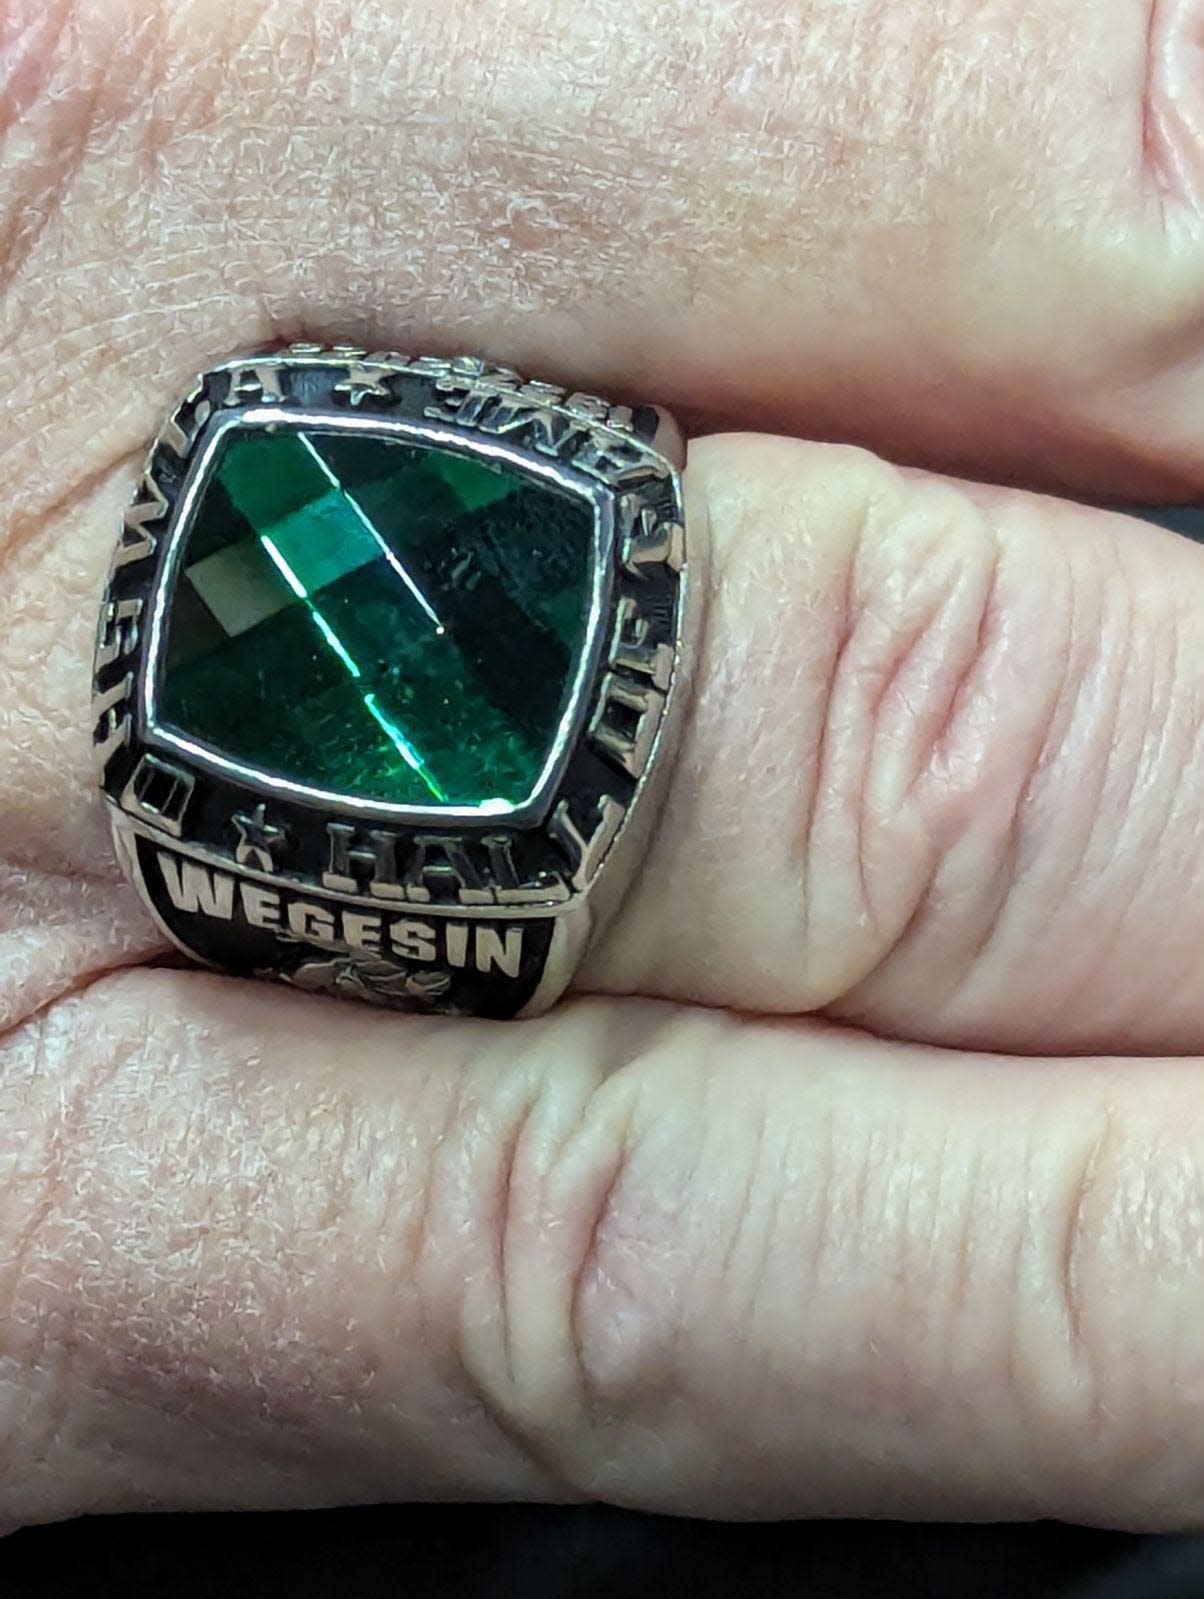 Jim Wegesin was presented this ring for his induction into the Ohio High School Wrestling Coaches Association Hall of Fame.